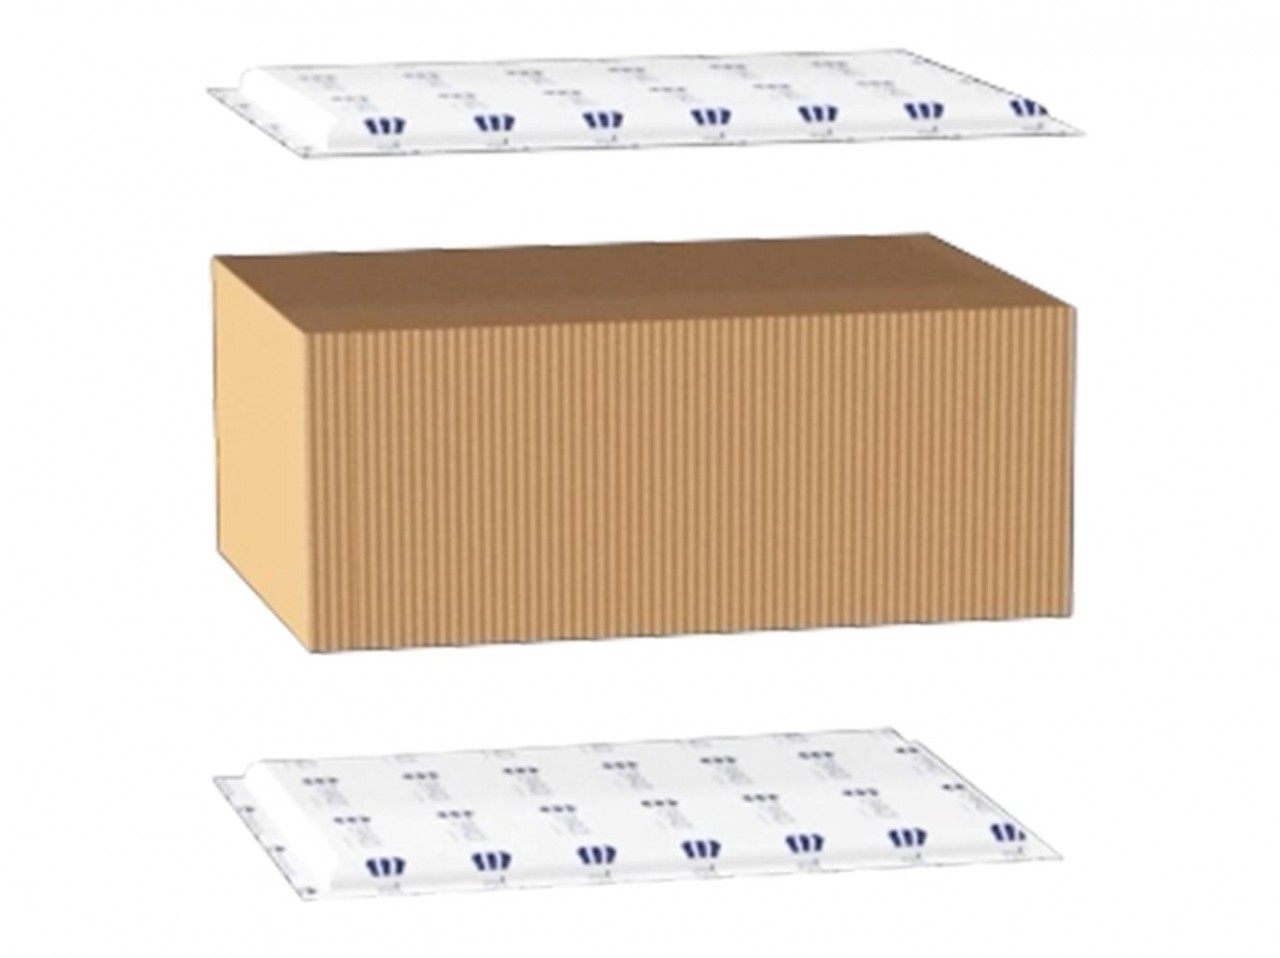 tempack-thermal-barriers-3@2x-1280x958